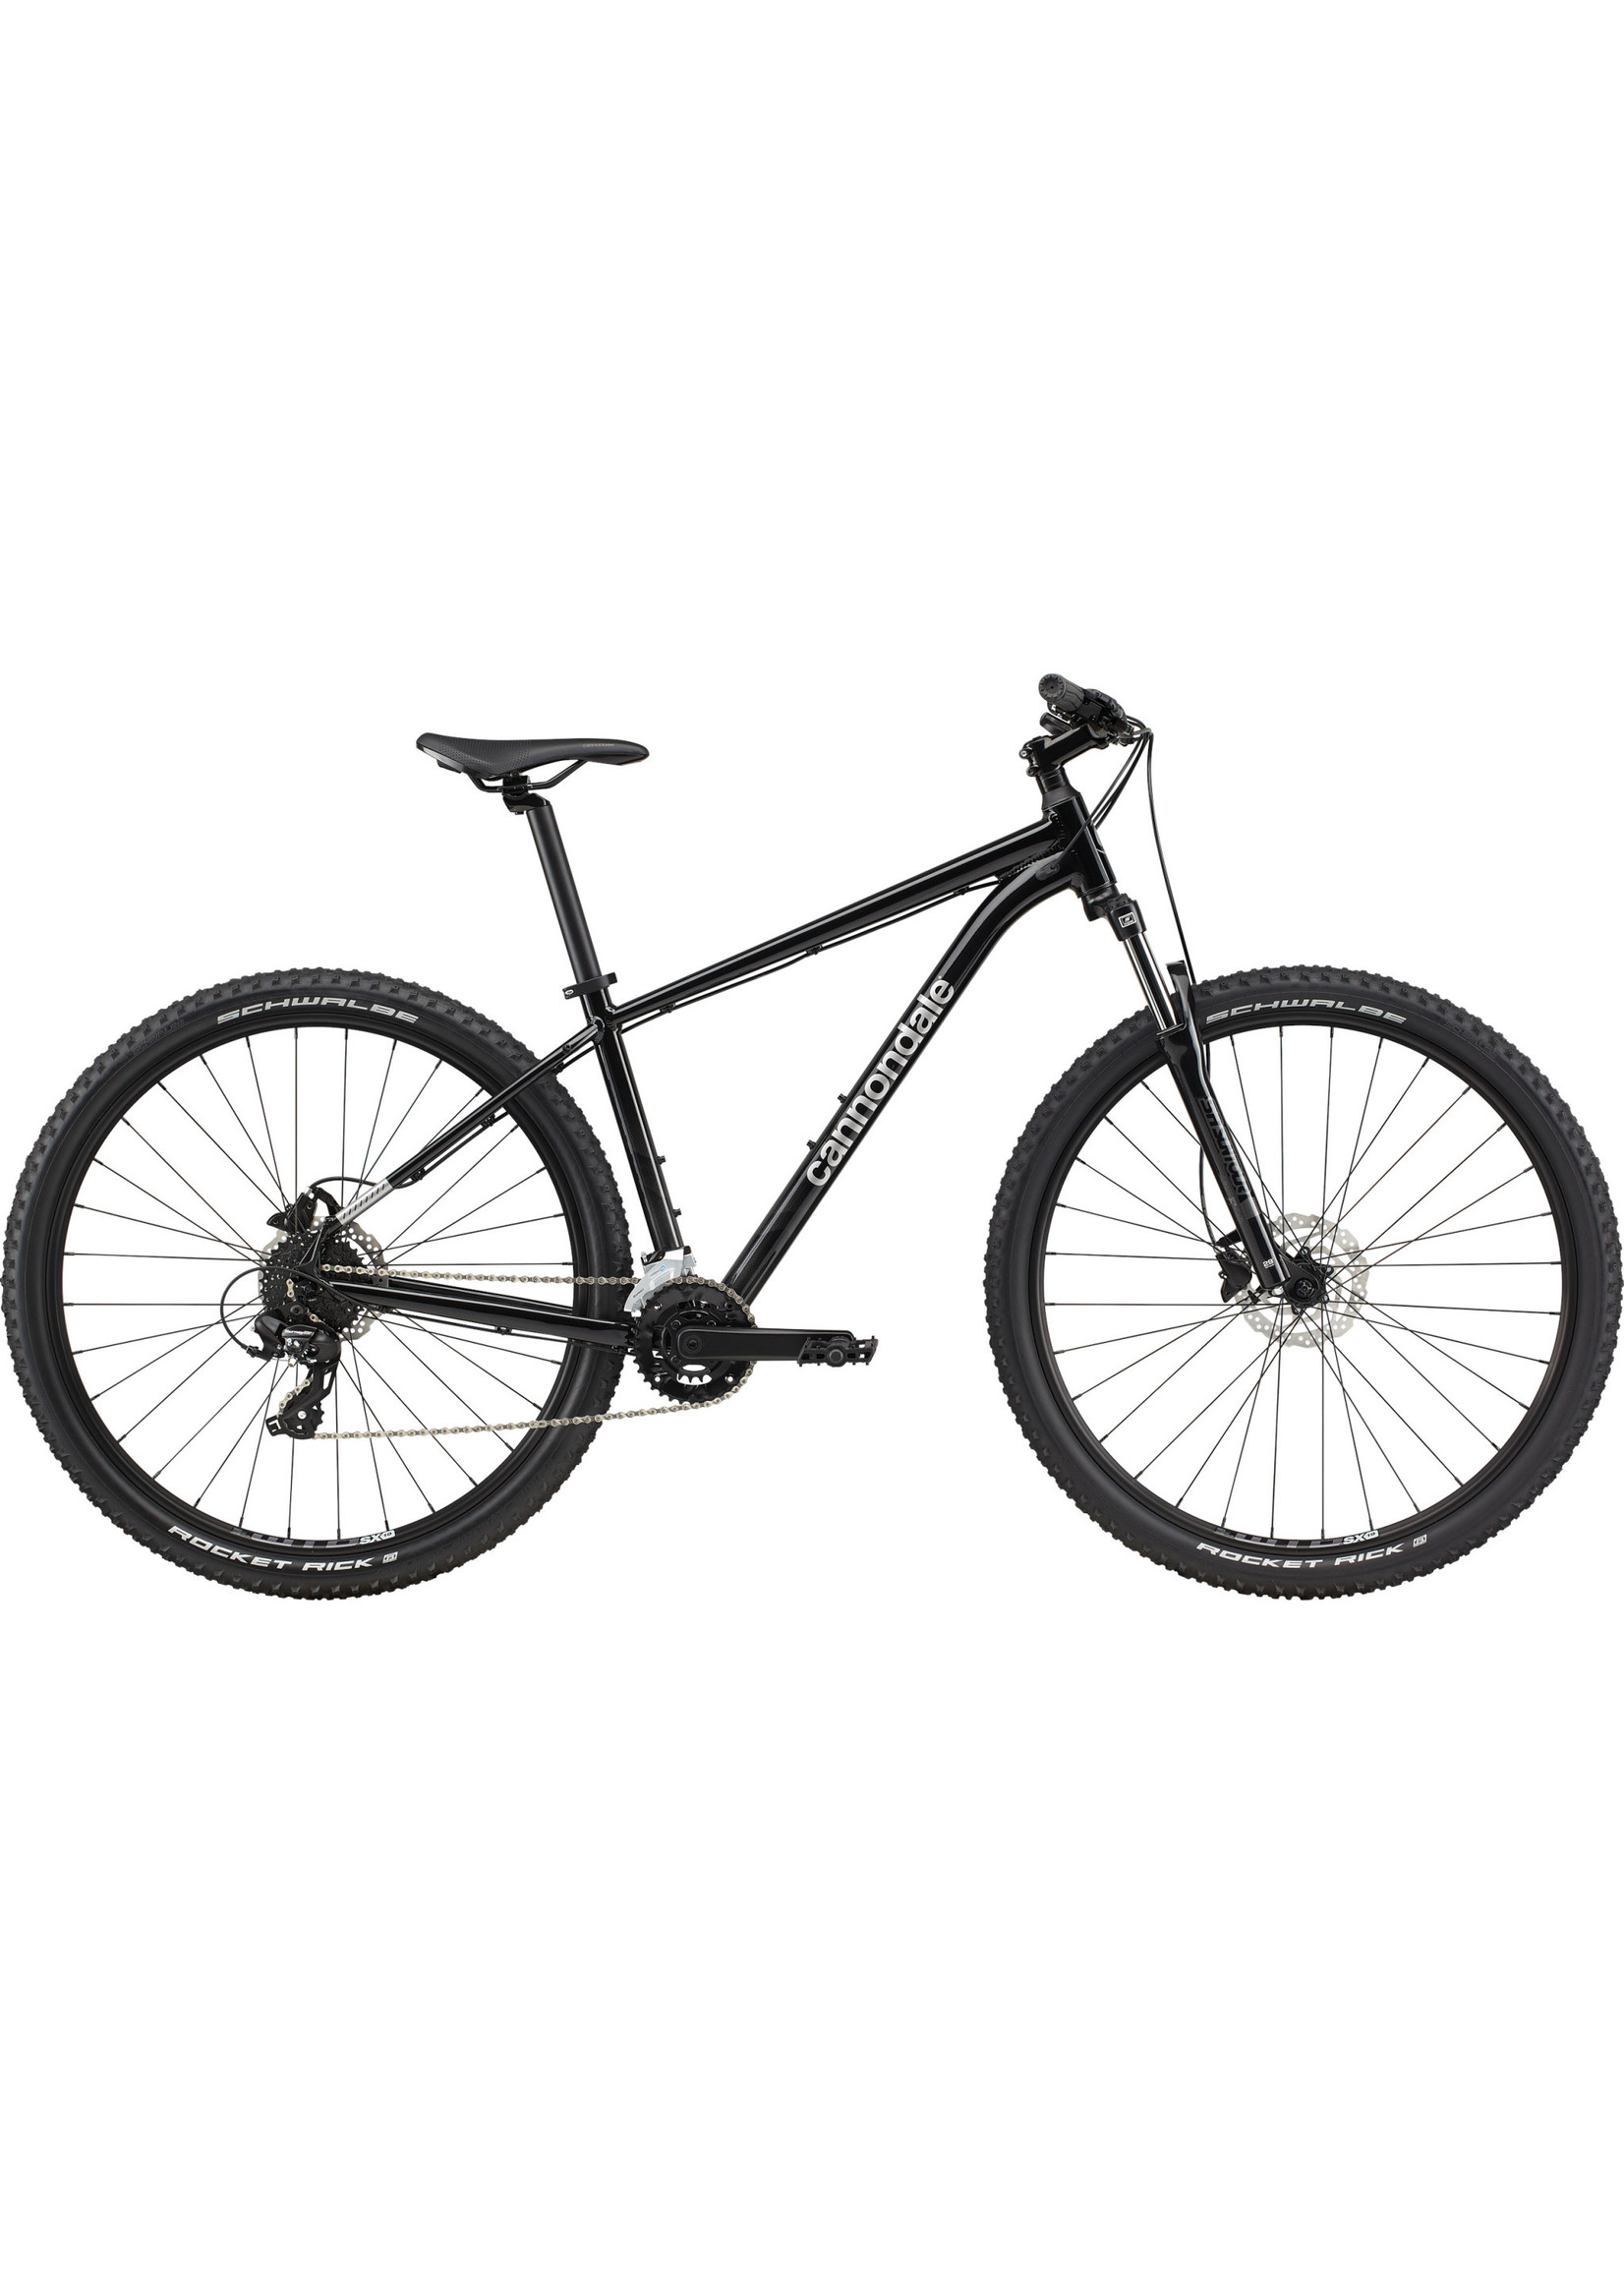 Cannondale Cannondale Trail 8 Black GRY LG 29